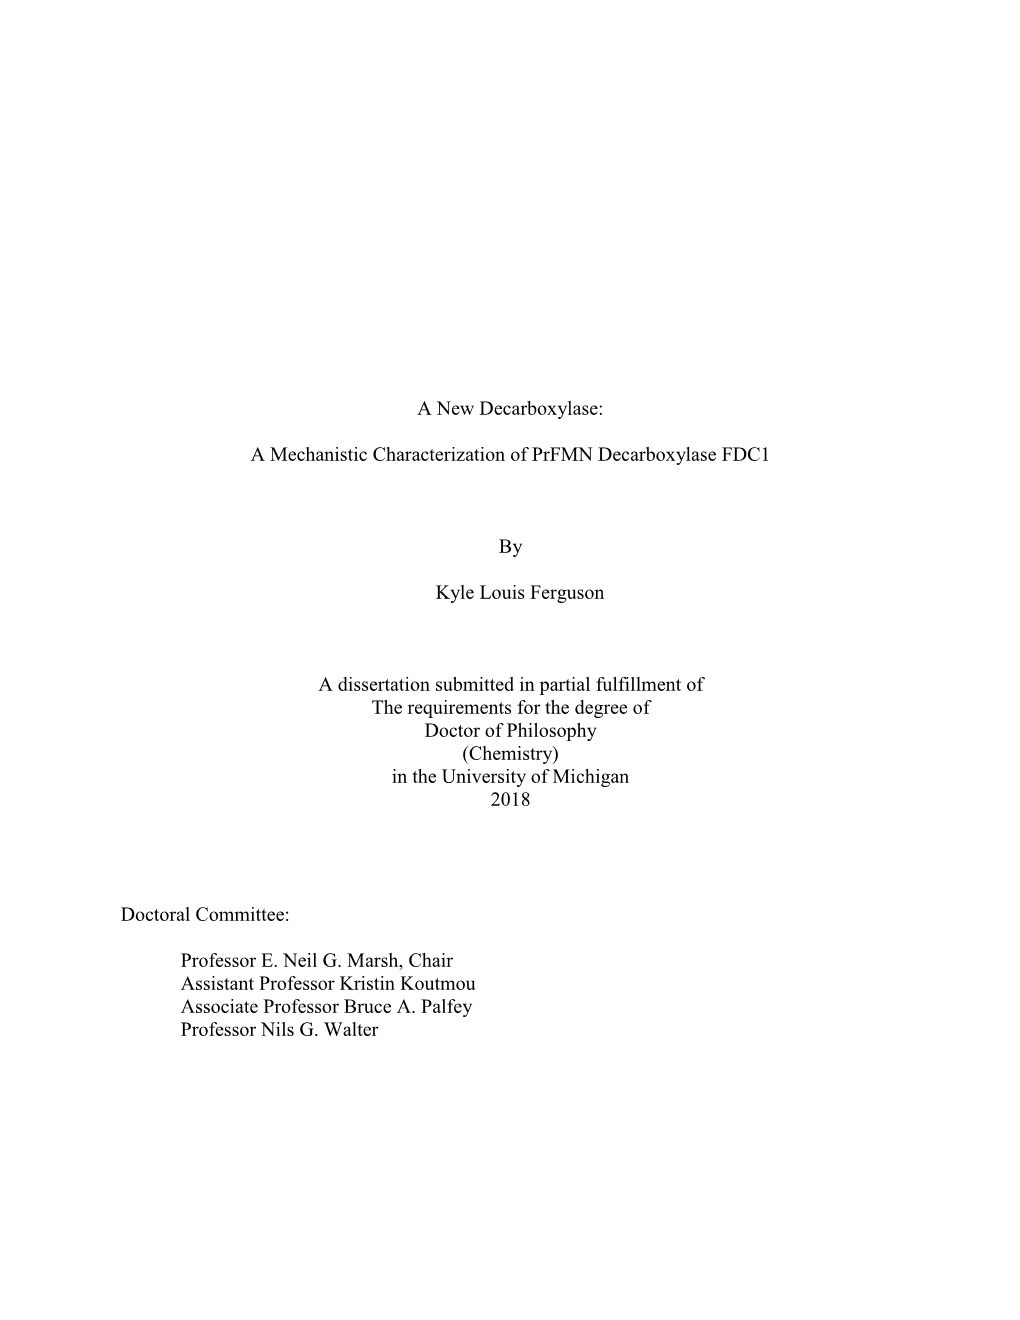 A Mechanistic Characterization of Prfmn Decarboxylase FDC1 by Kyle Louis Ferguson a Dissertation Submitted